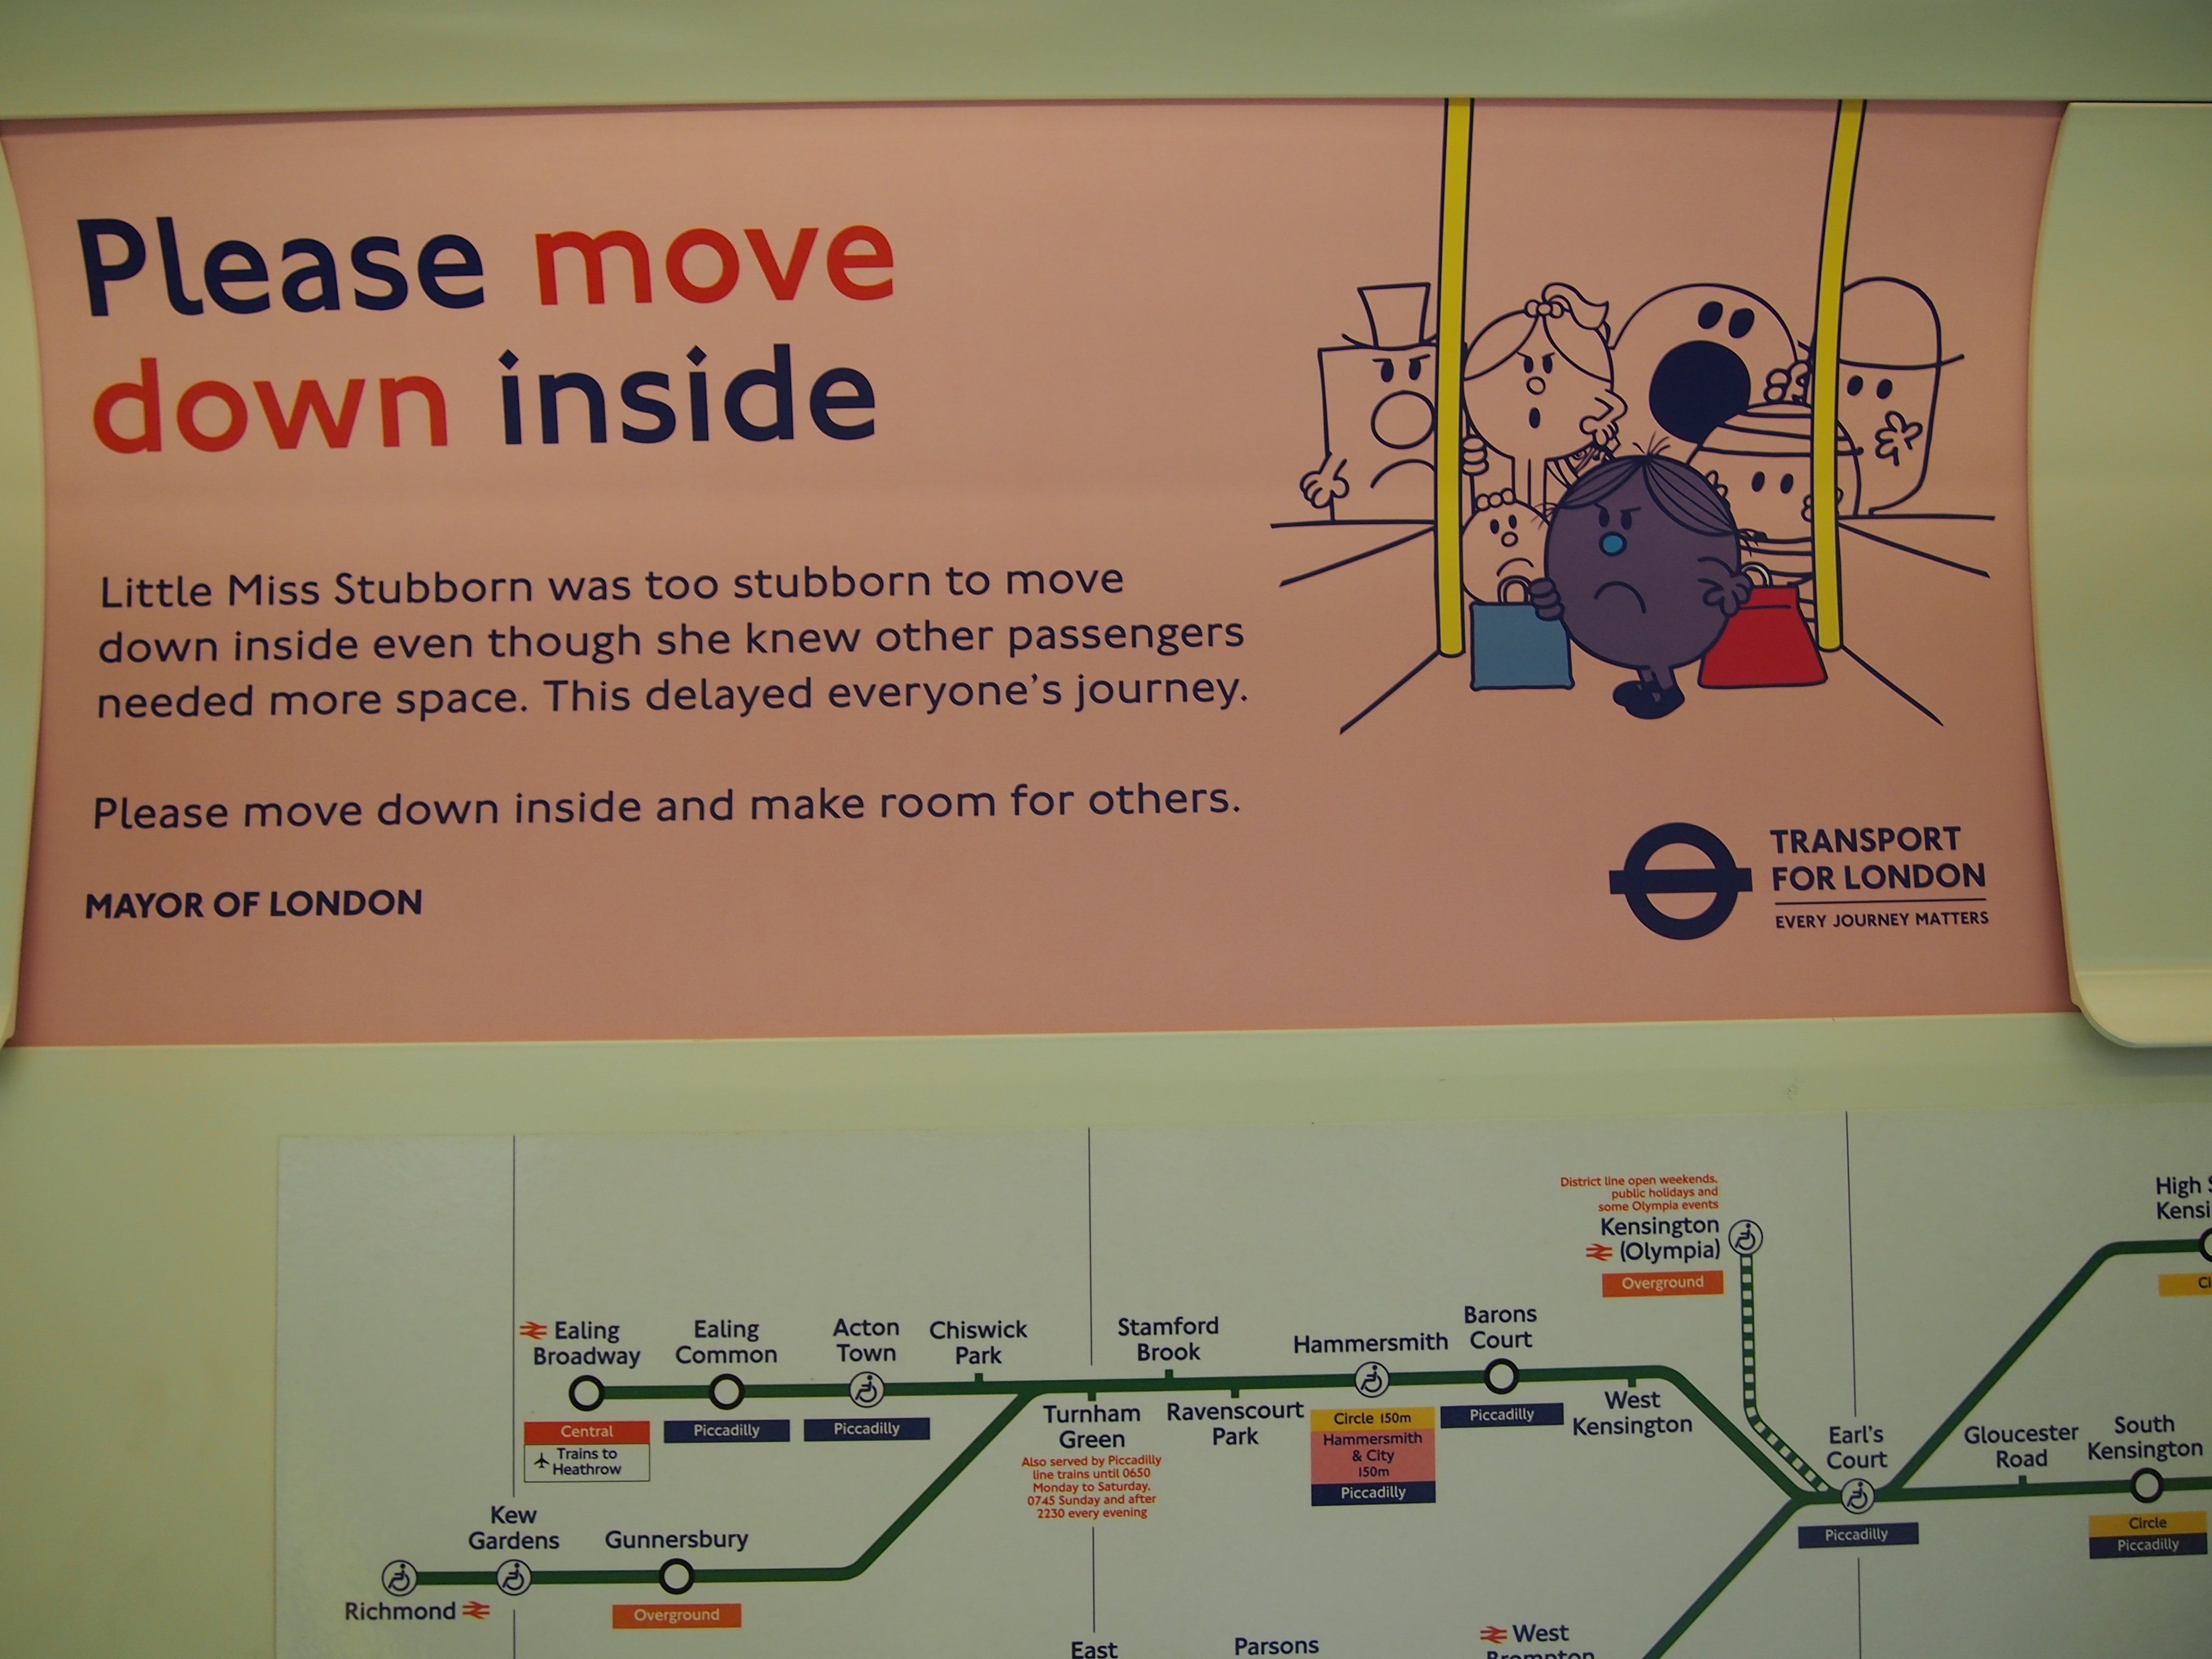 Move down inside the tube sign. 